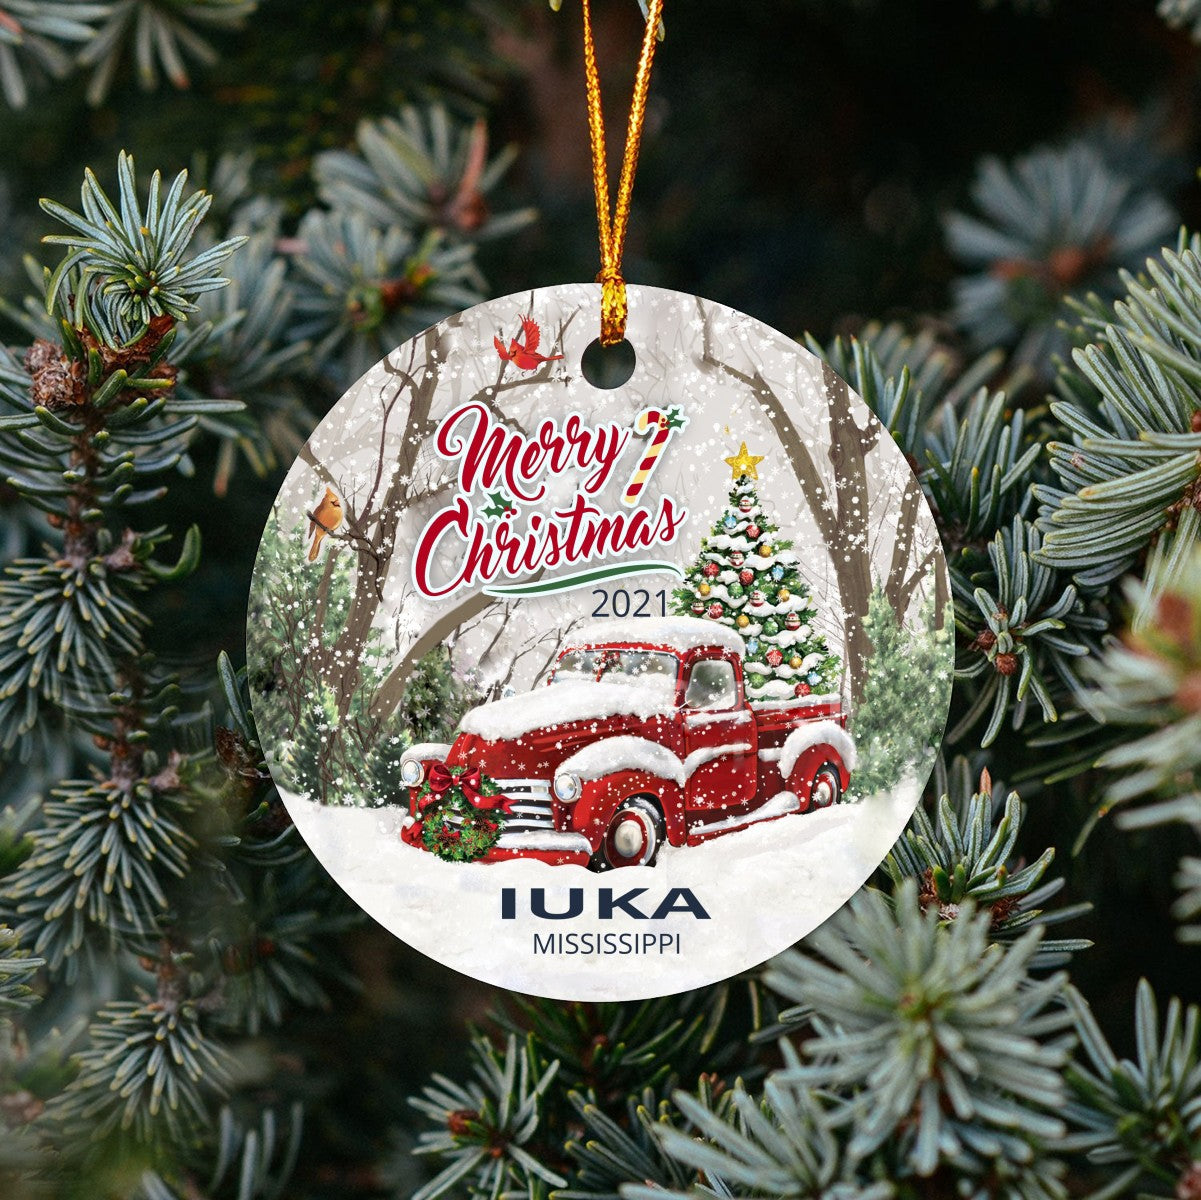 Christmas Tree Ornaments Iuka - Ornament Customize With Name City And State Iuka Mississippi MS - Red Truck Xmas Ornaments 3'' Plastic Gift For Family, Friend And Housewarming